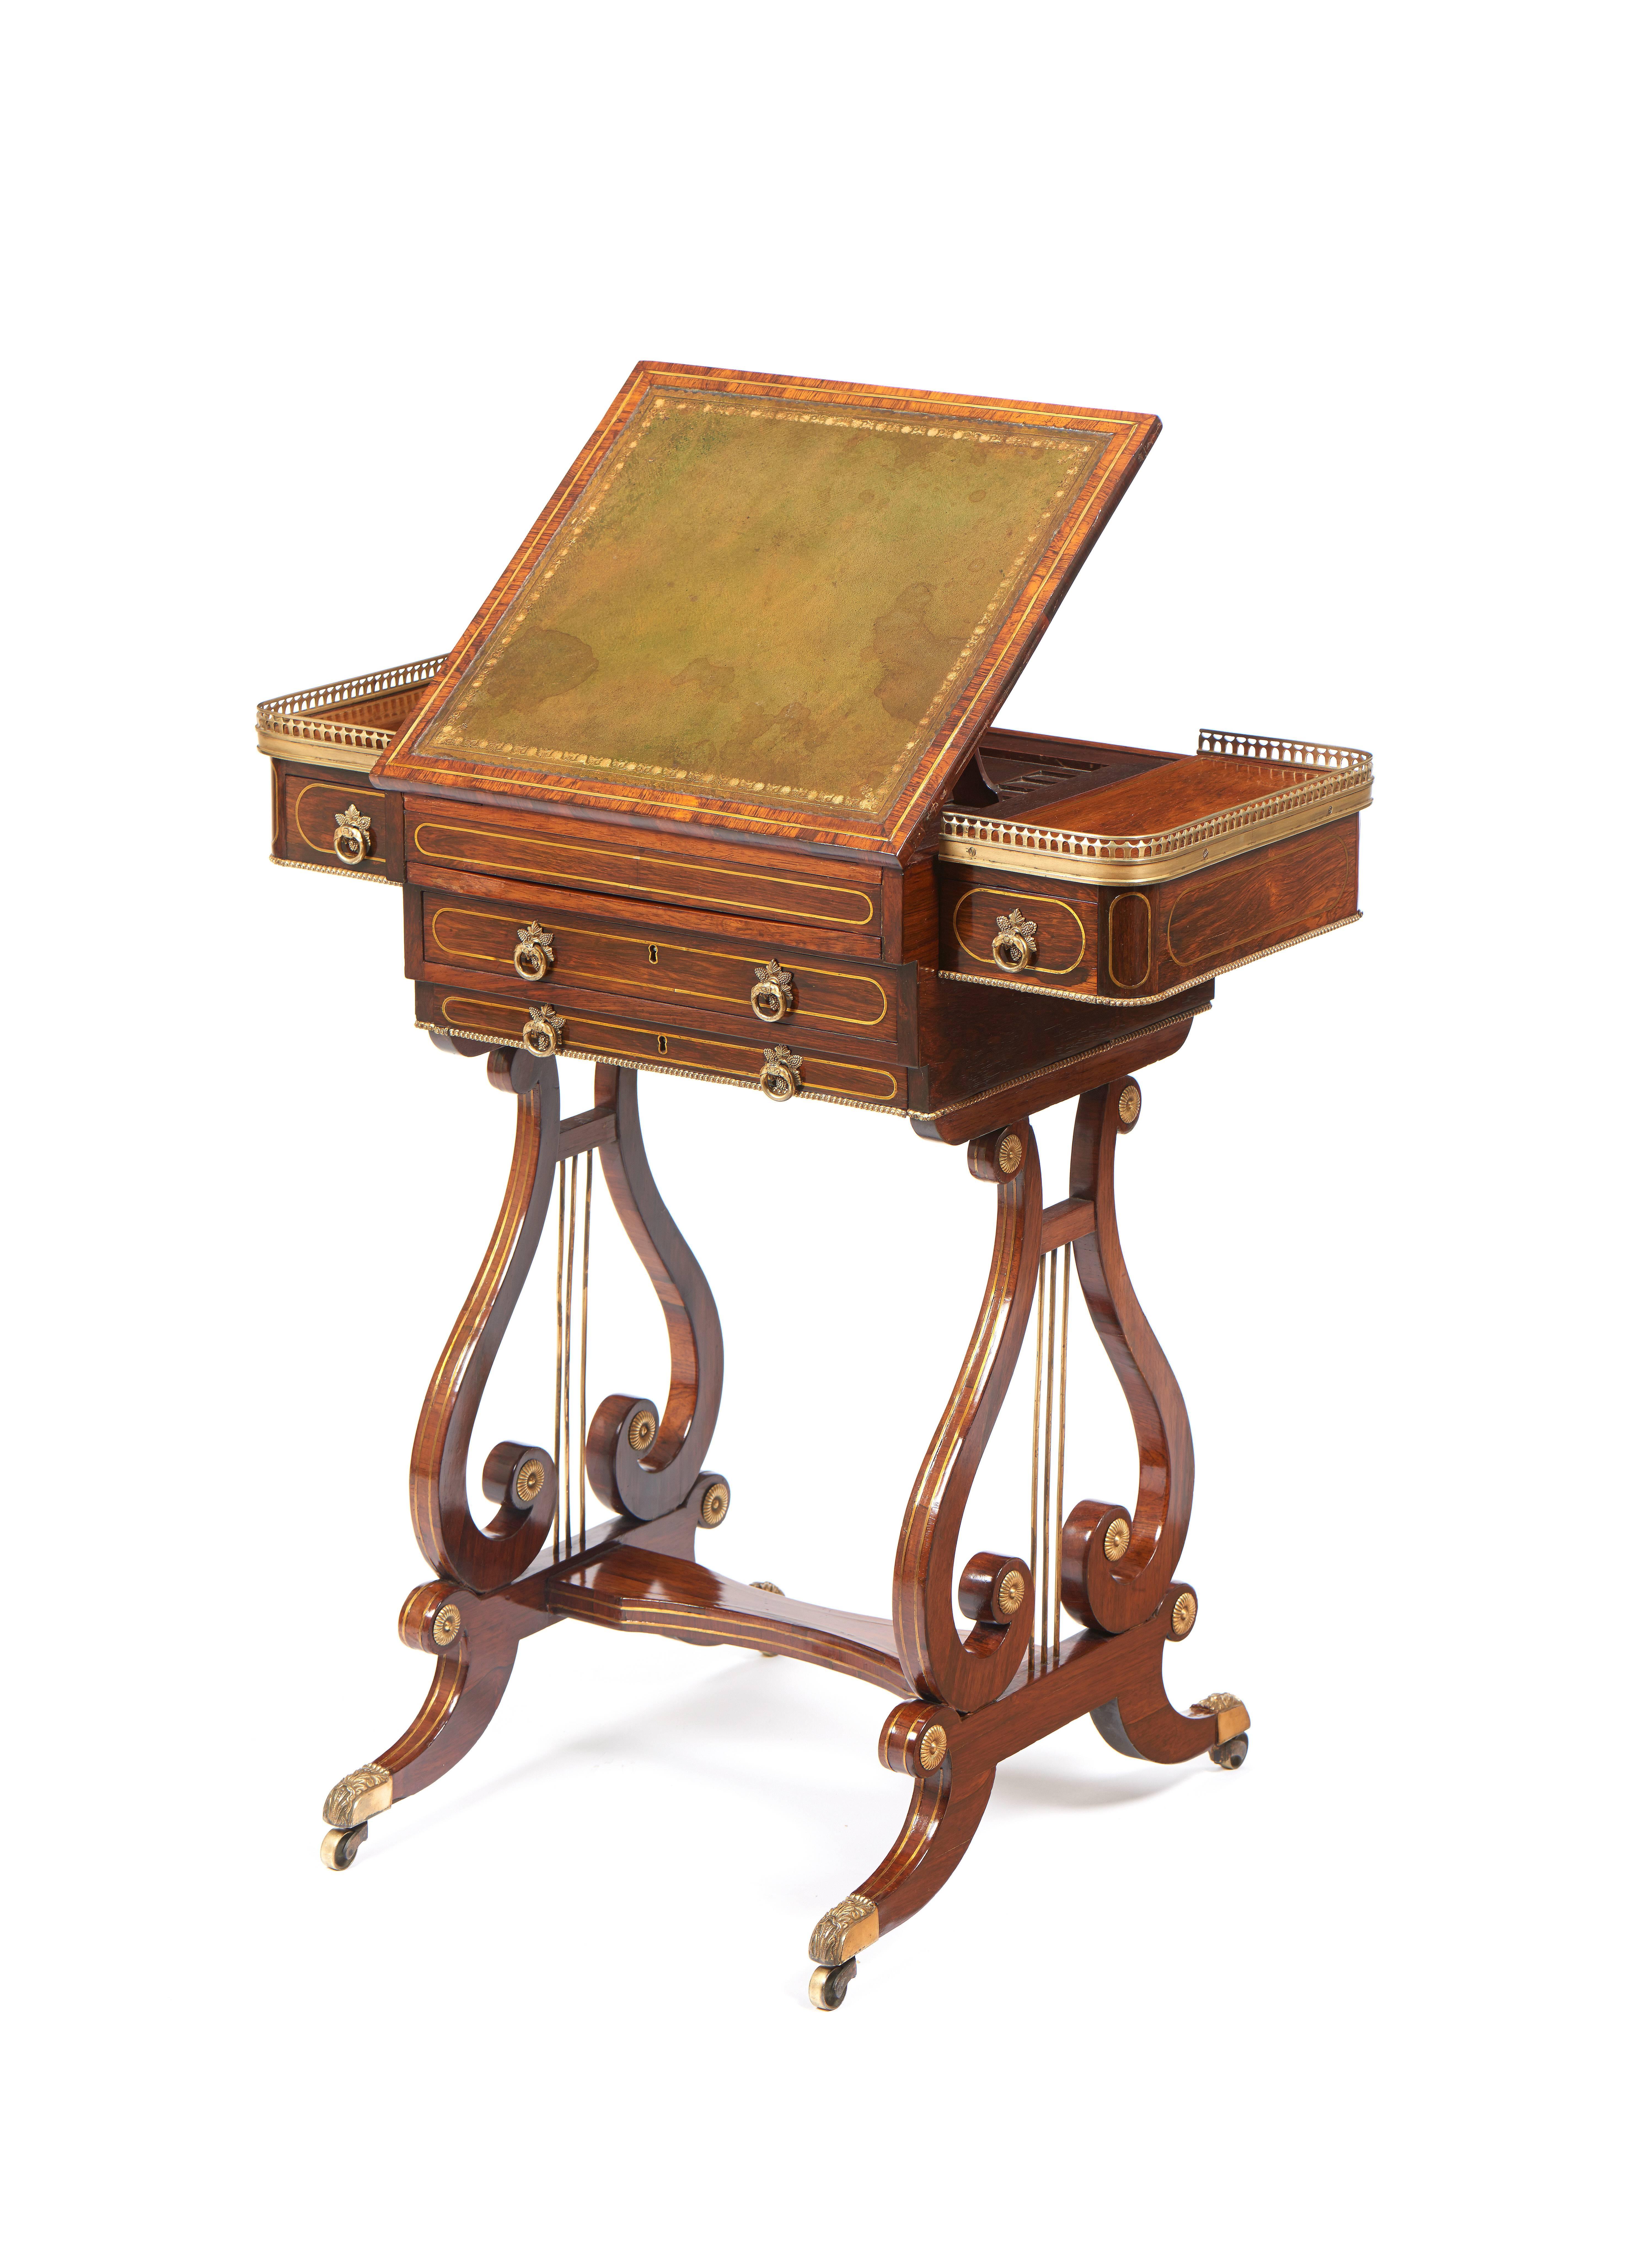 For sale on 1stdibs a Regency brass-mounted and inlaid rosewood writing and games table. The shaped rectangular top with a ratcheted sliding central panel inset with gilt-tooled green leather enclosing a well for backgammon, above a pull-out chess